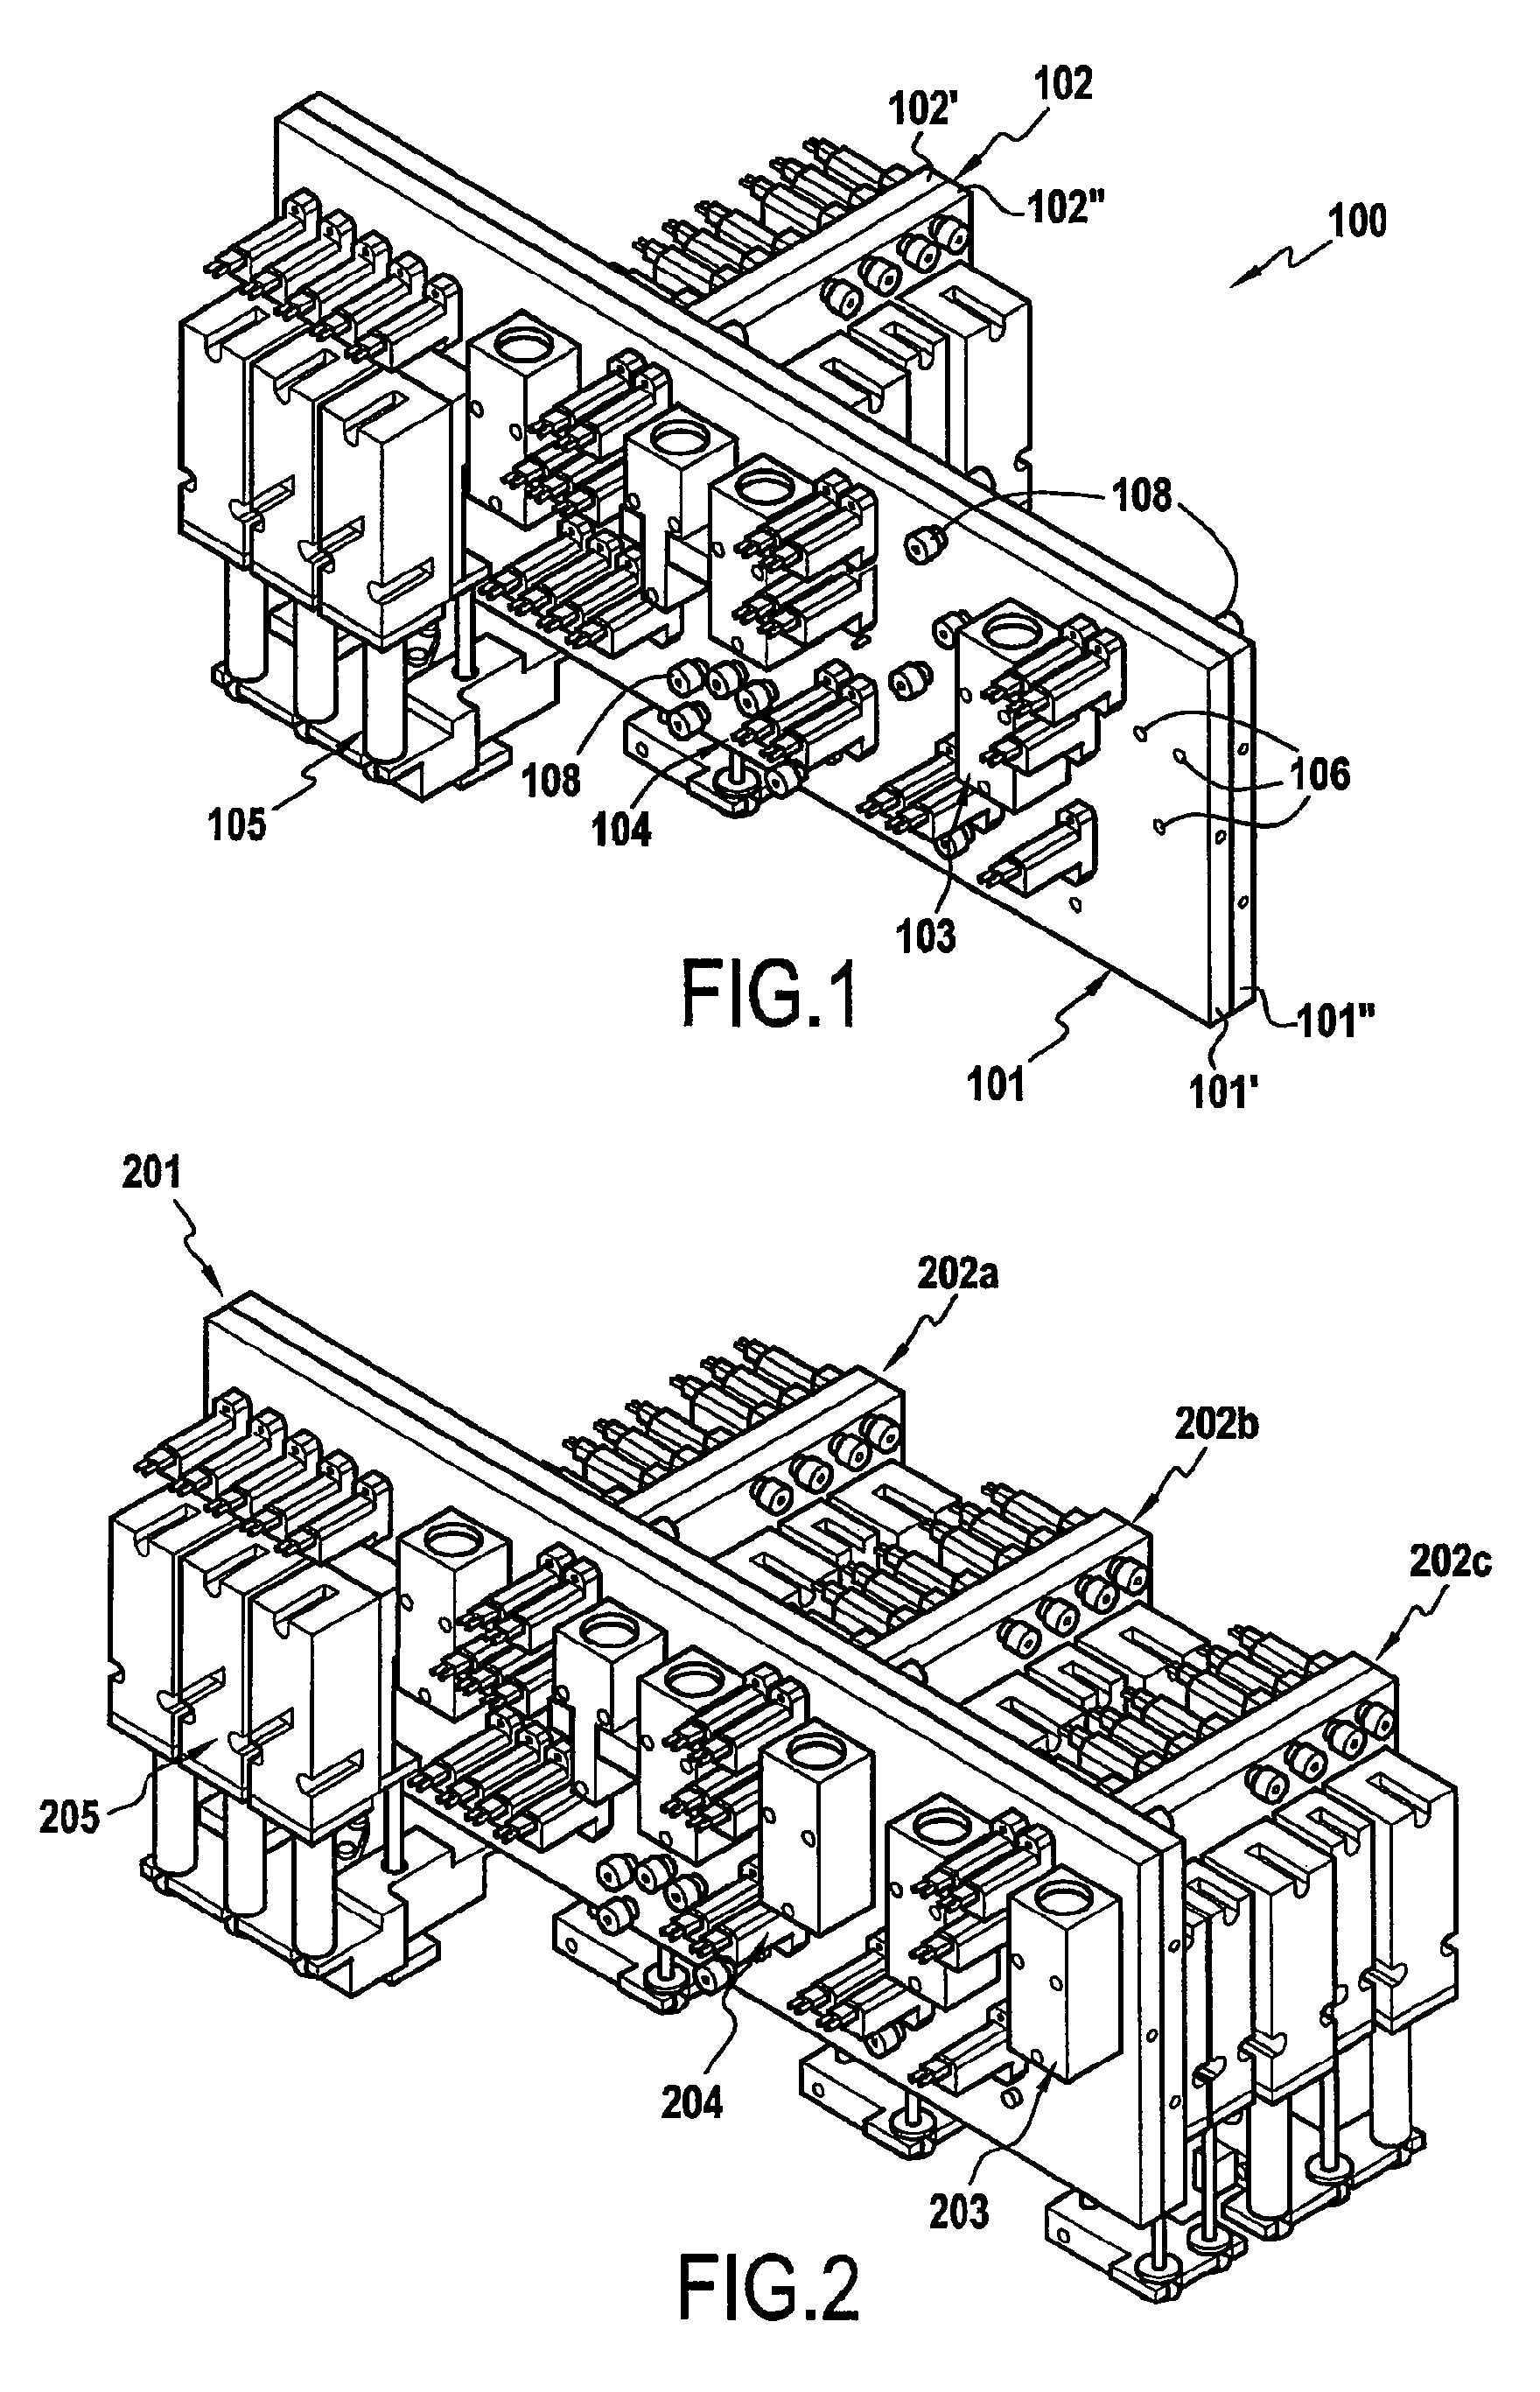 Modular device for analyzing a biological fluid, such as blood